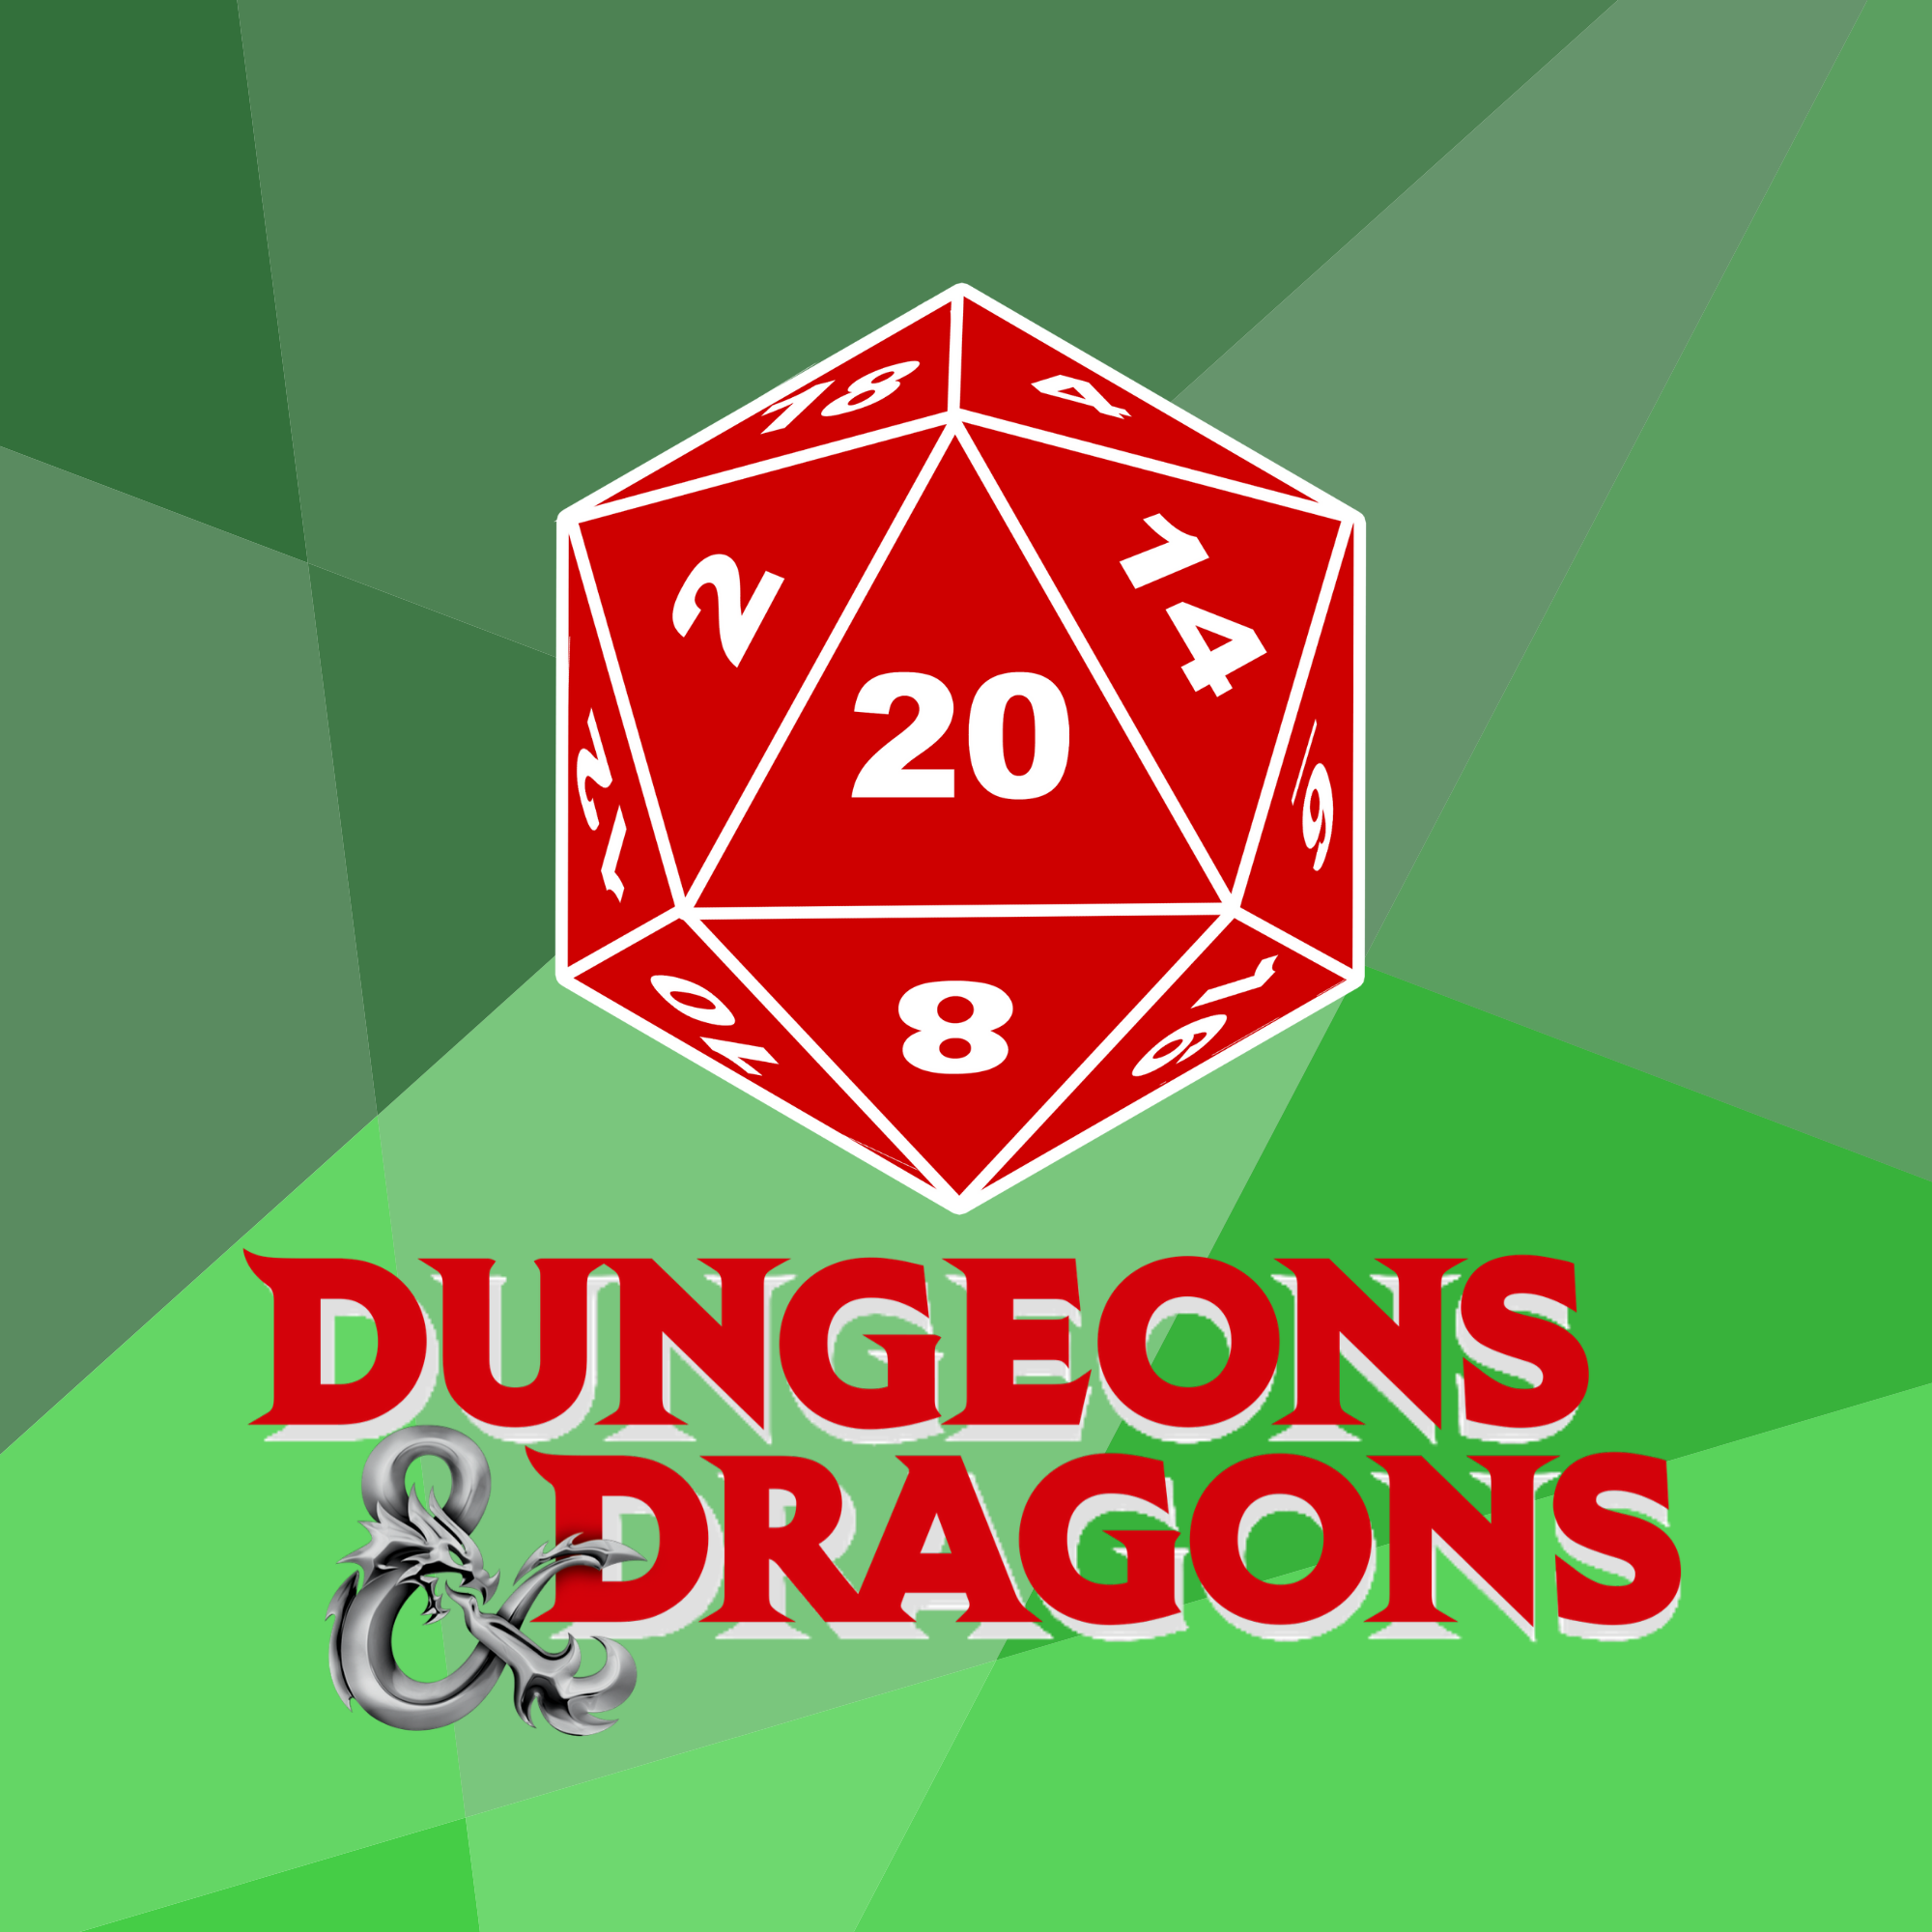 Image of die for Dungeons and Dragons